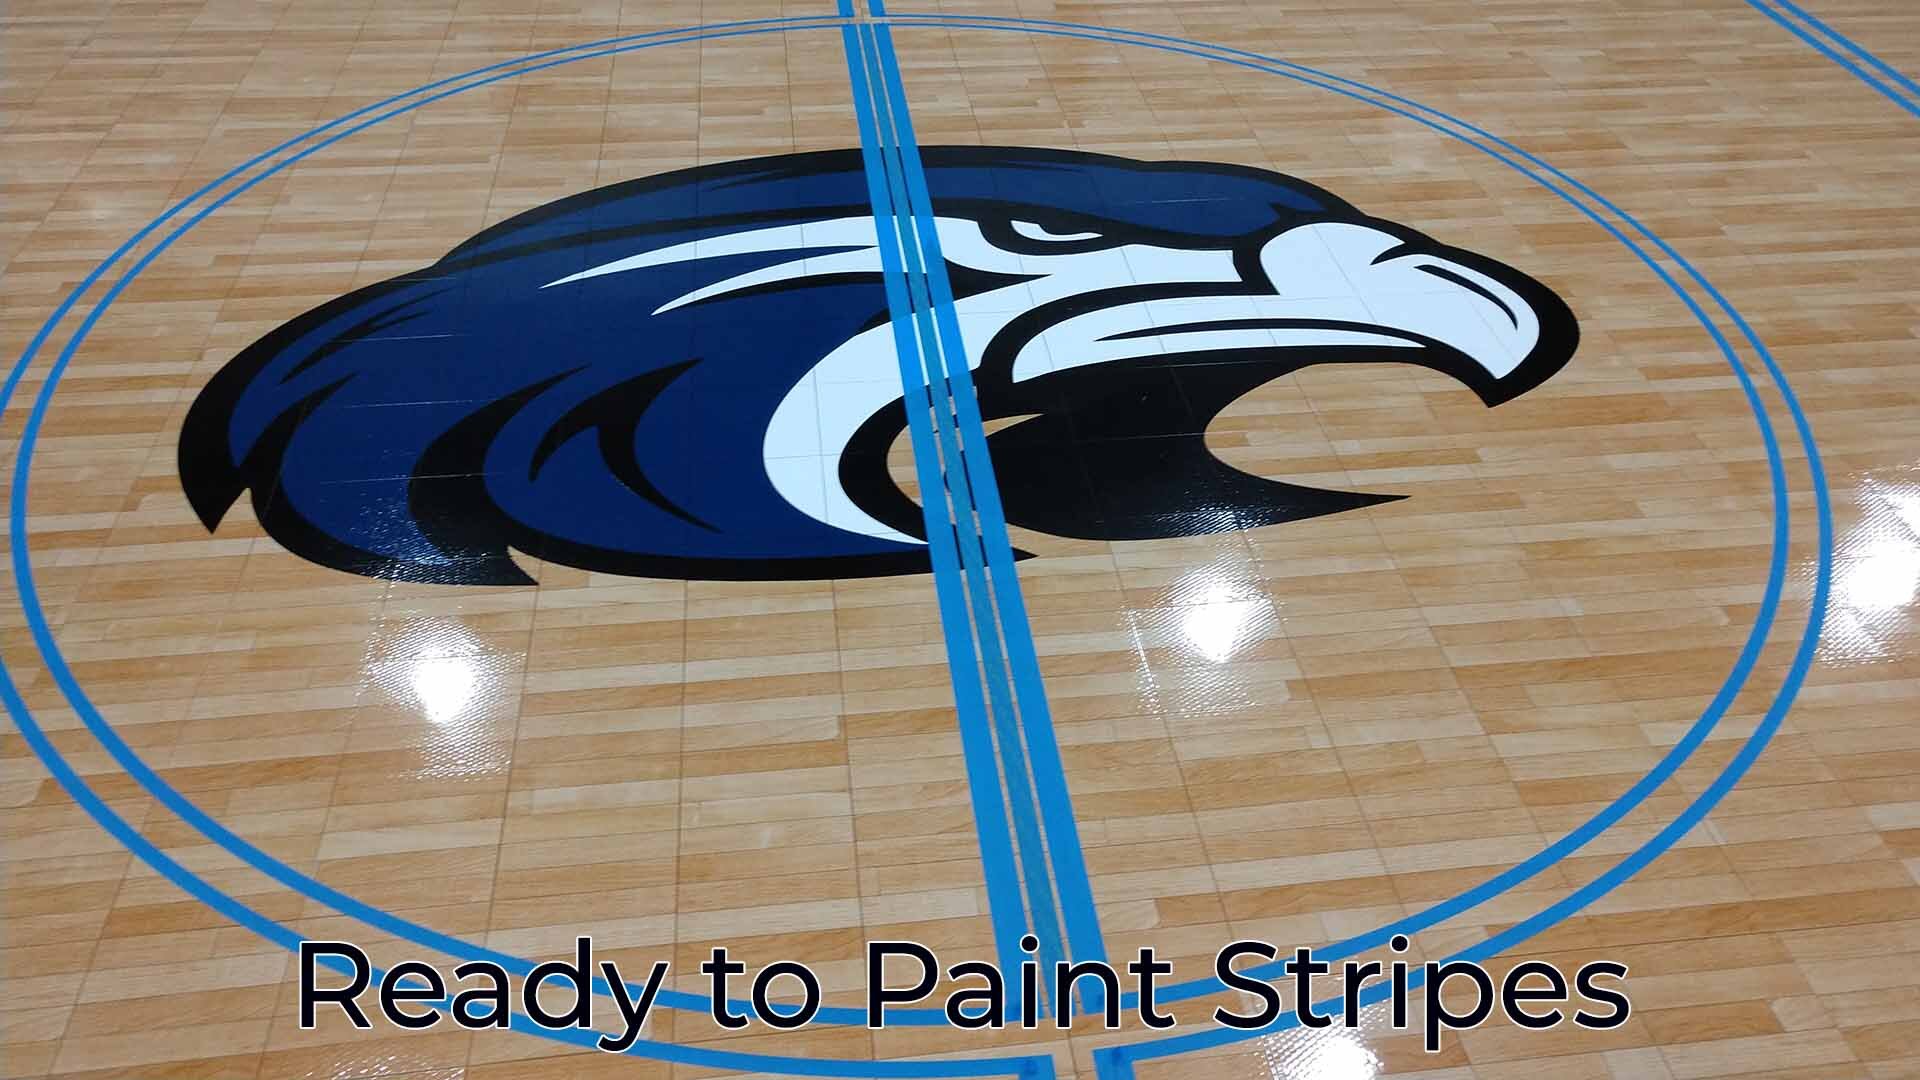 Getting Ready to Paint the Stripes